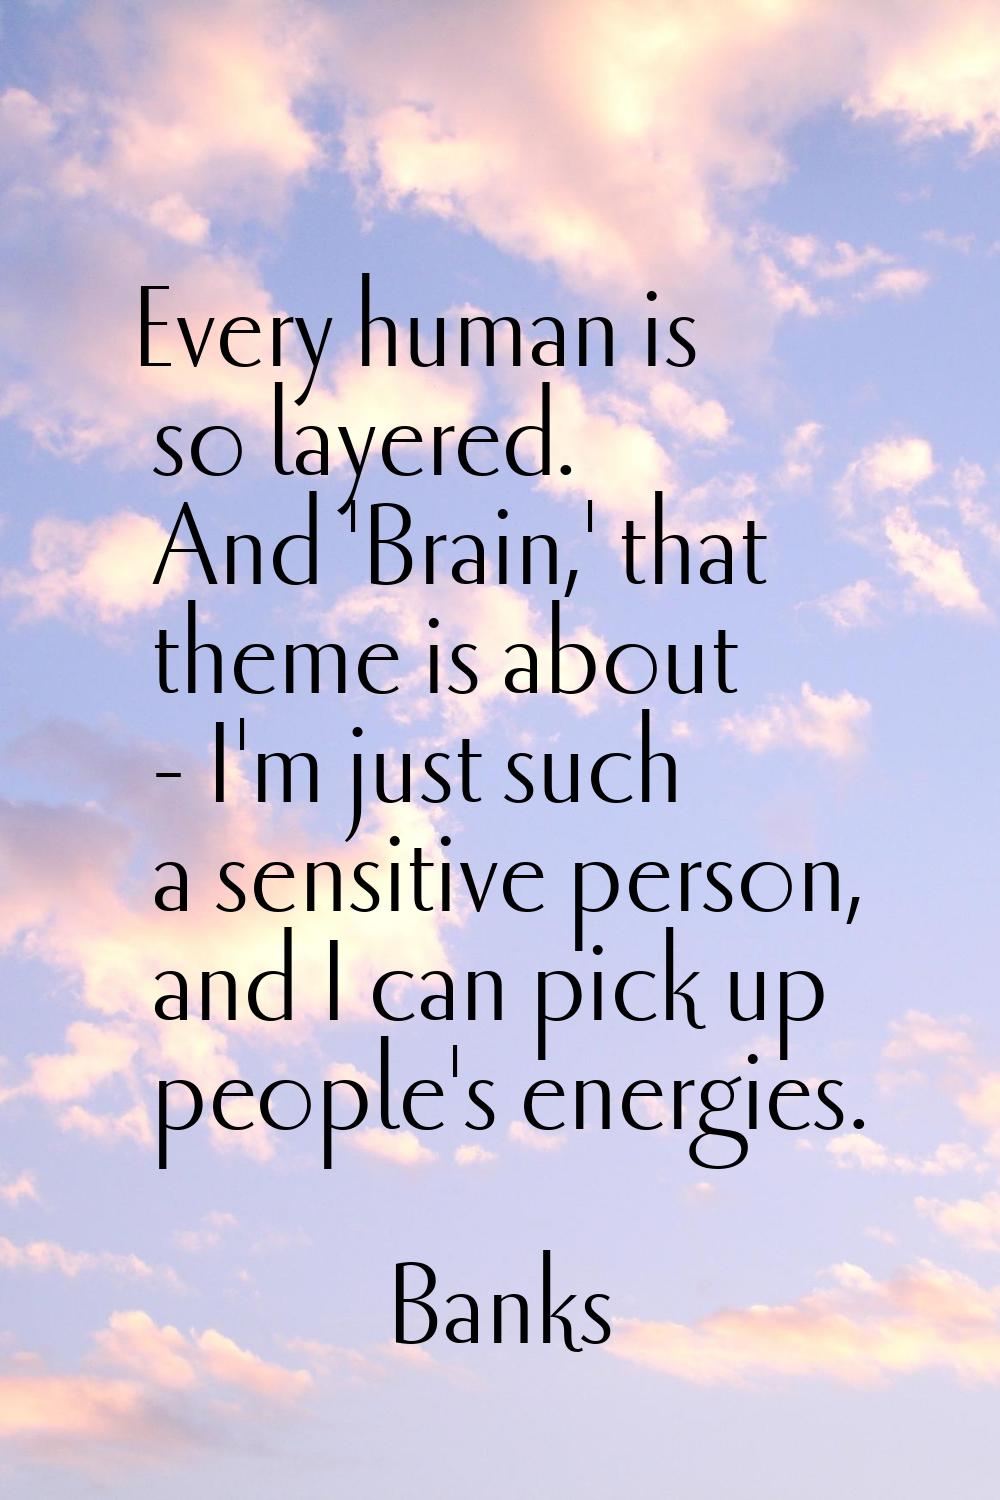 Every human is so layered. And 'Brain,' that theme is about - I'm just such a sensitive person, and